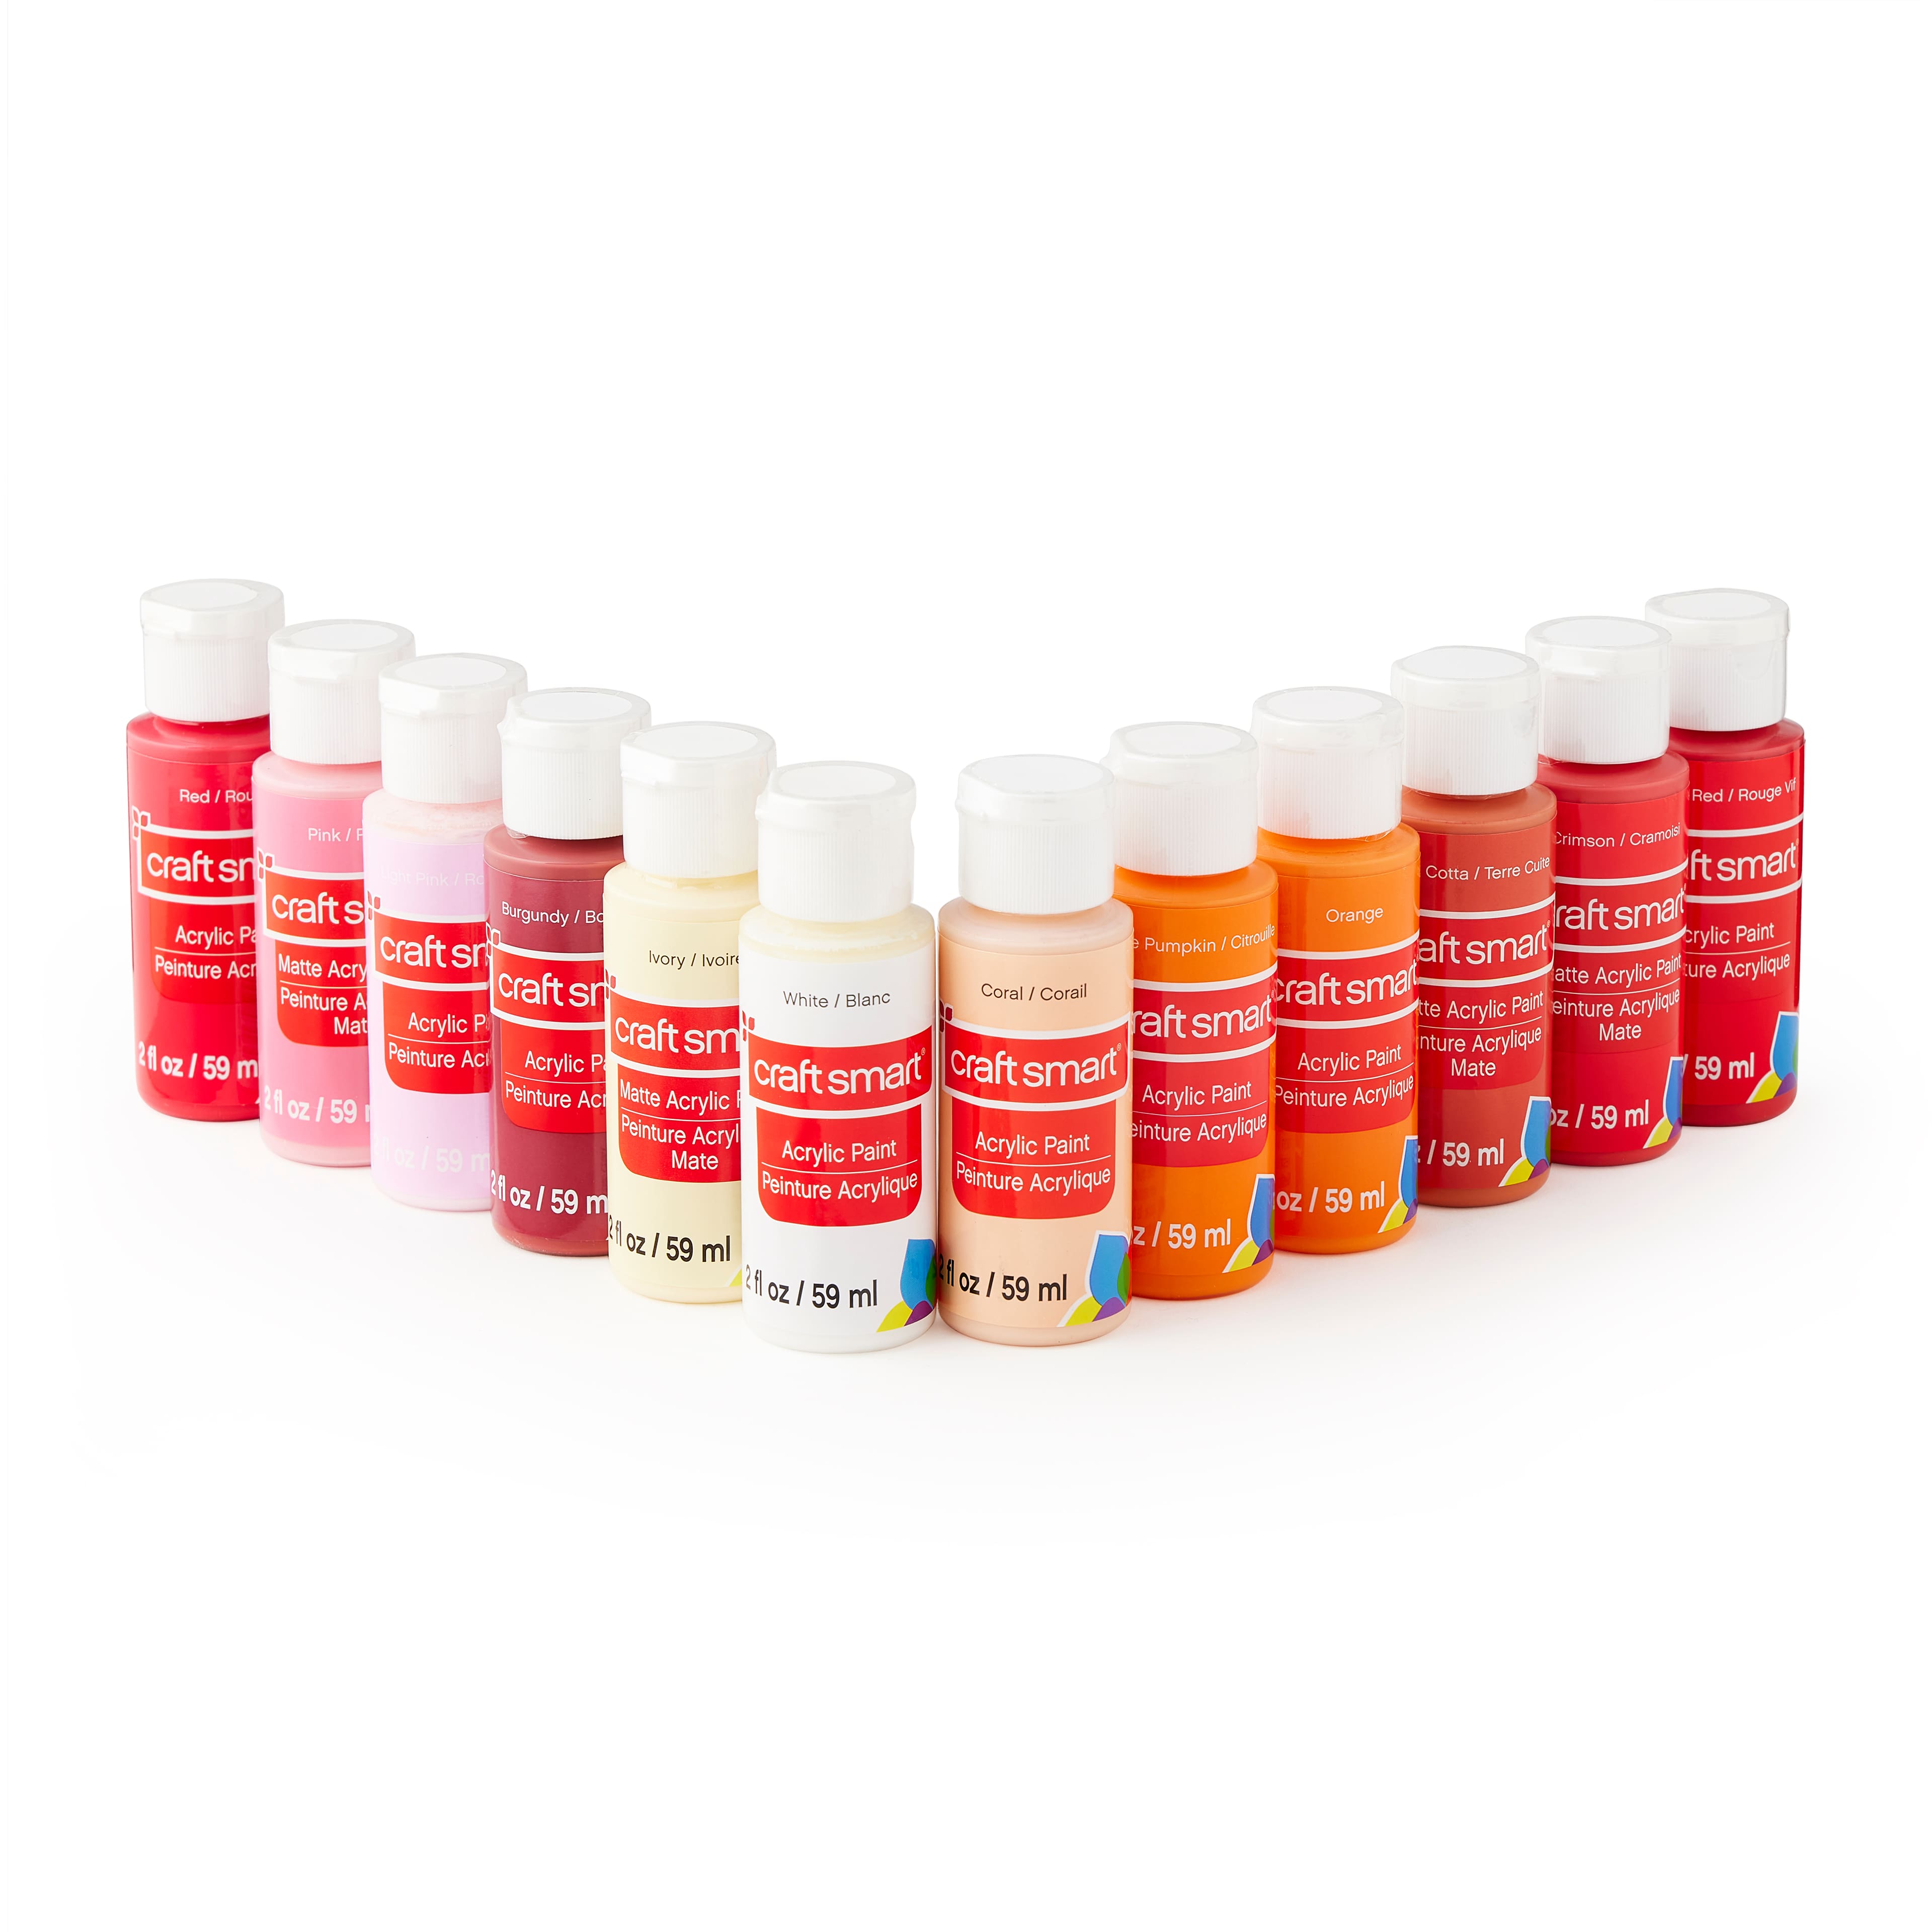 Outdoor Acrylic Paint Set Value Pack by Craft Smart® 